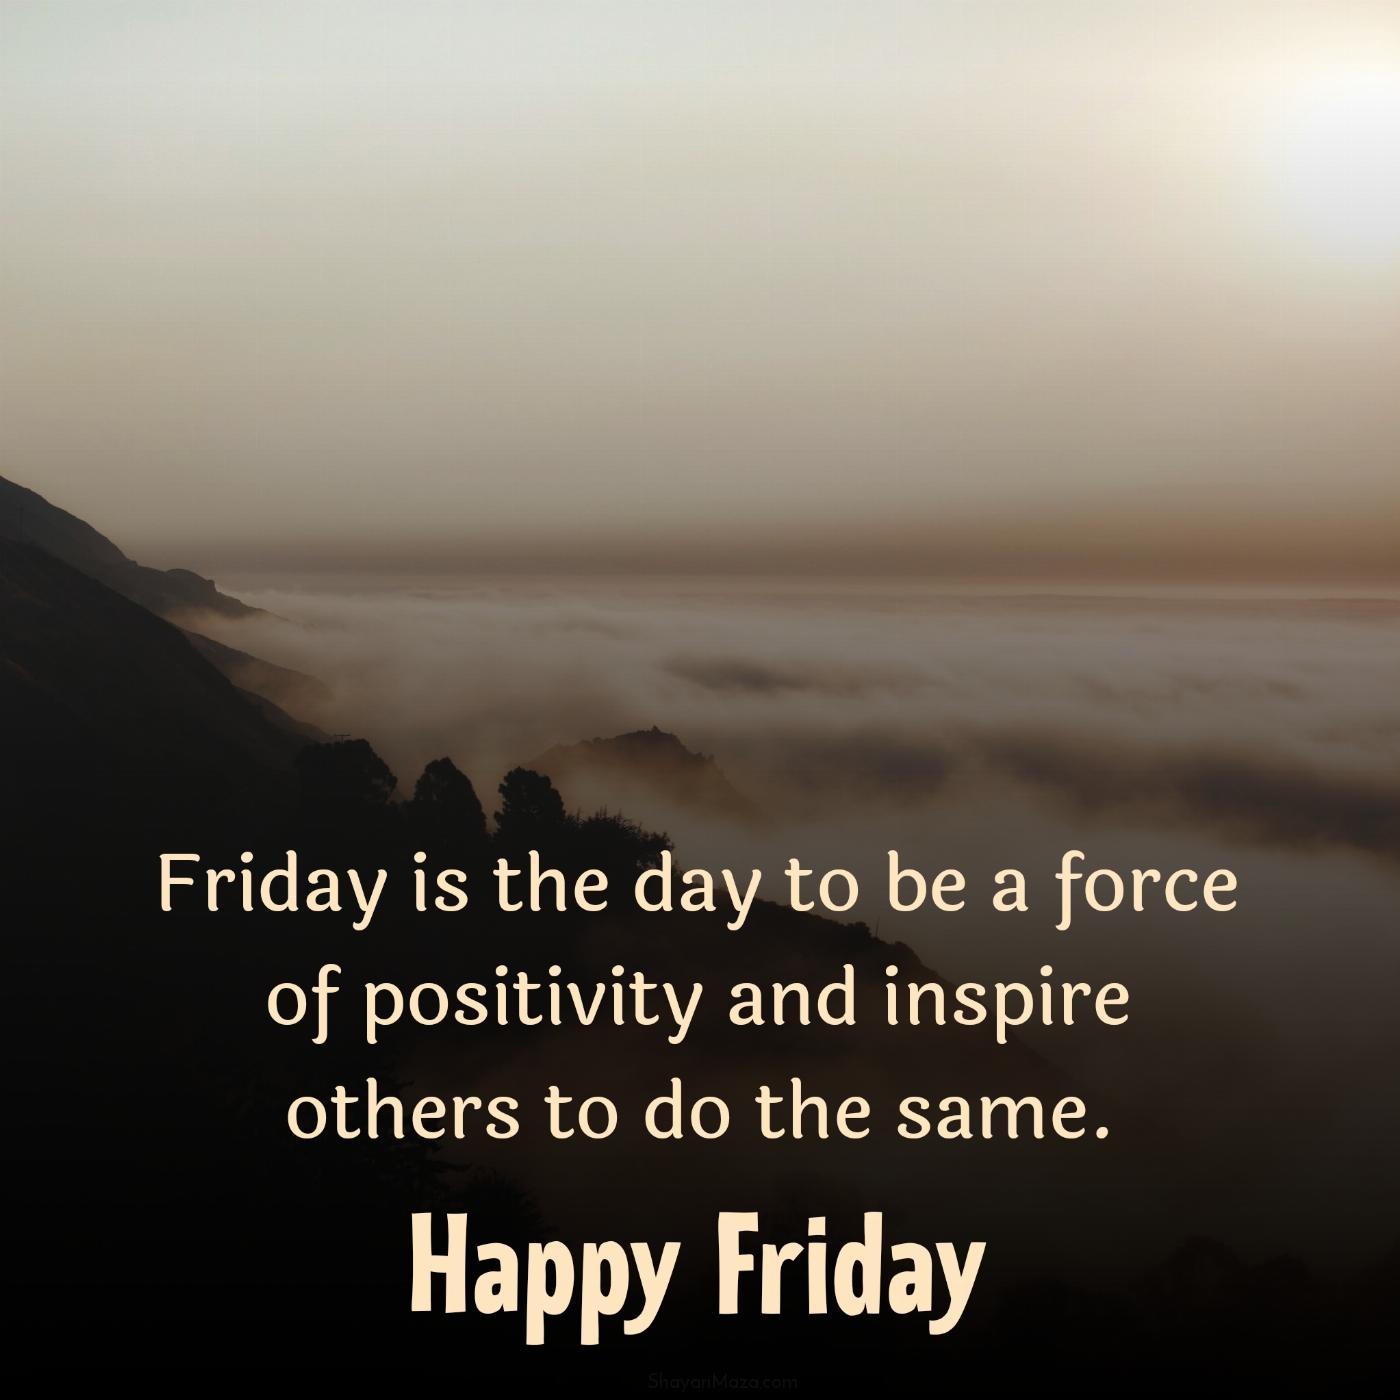 Friday is the day to be a force of positivity and inspire others